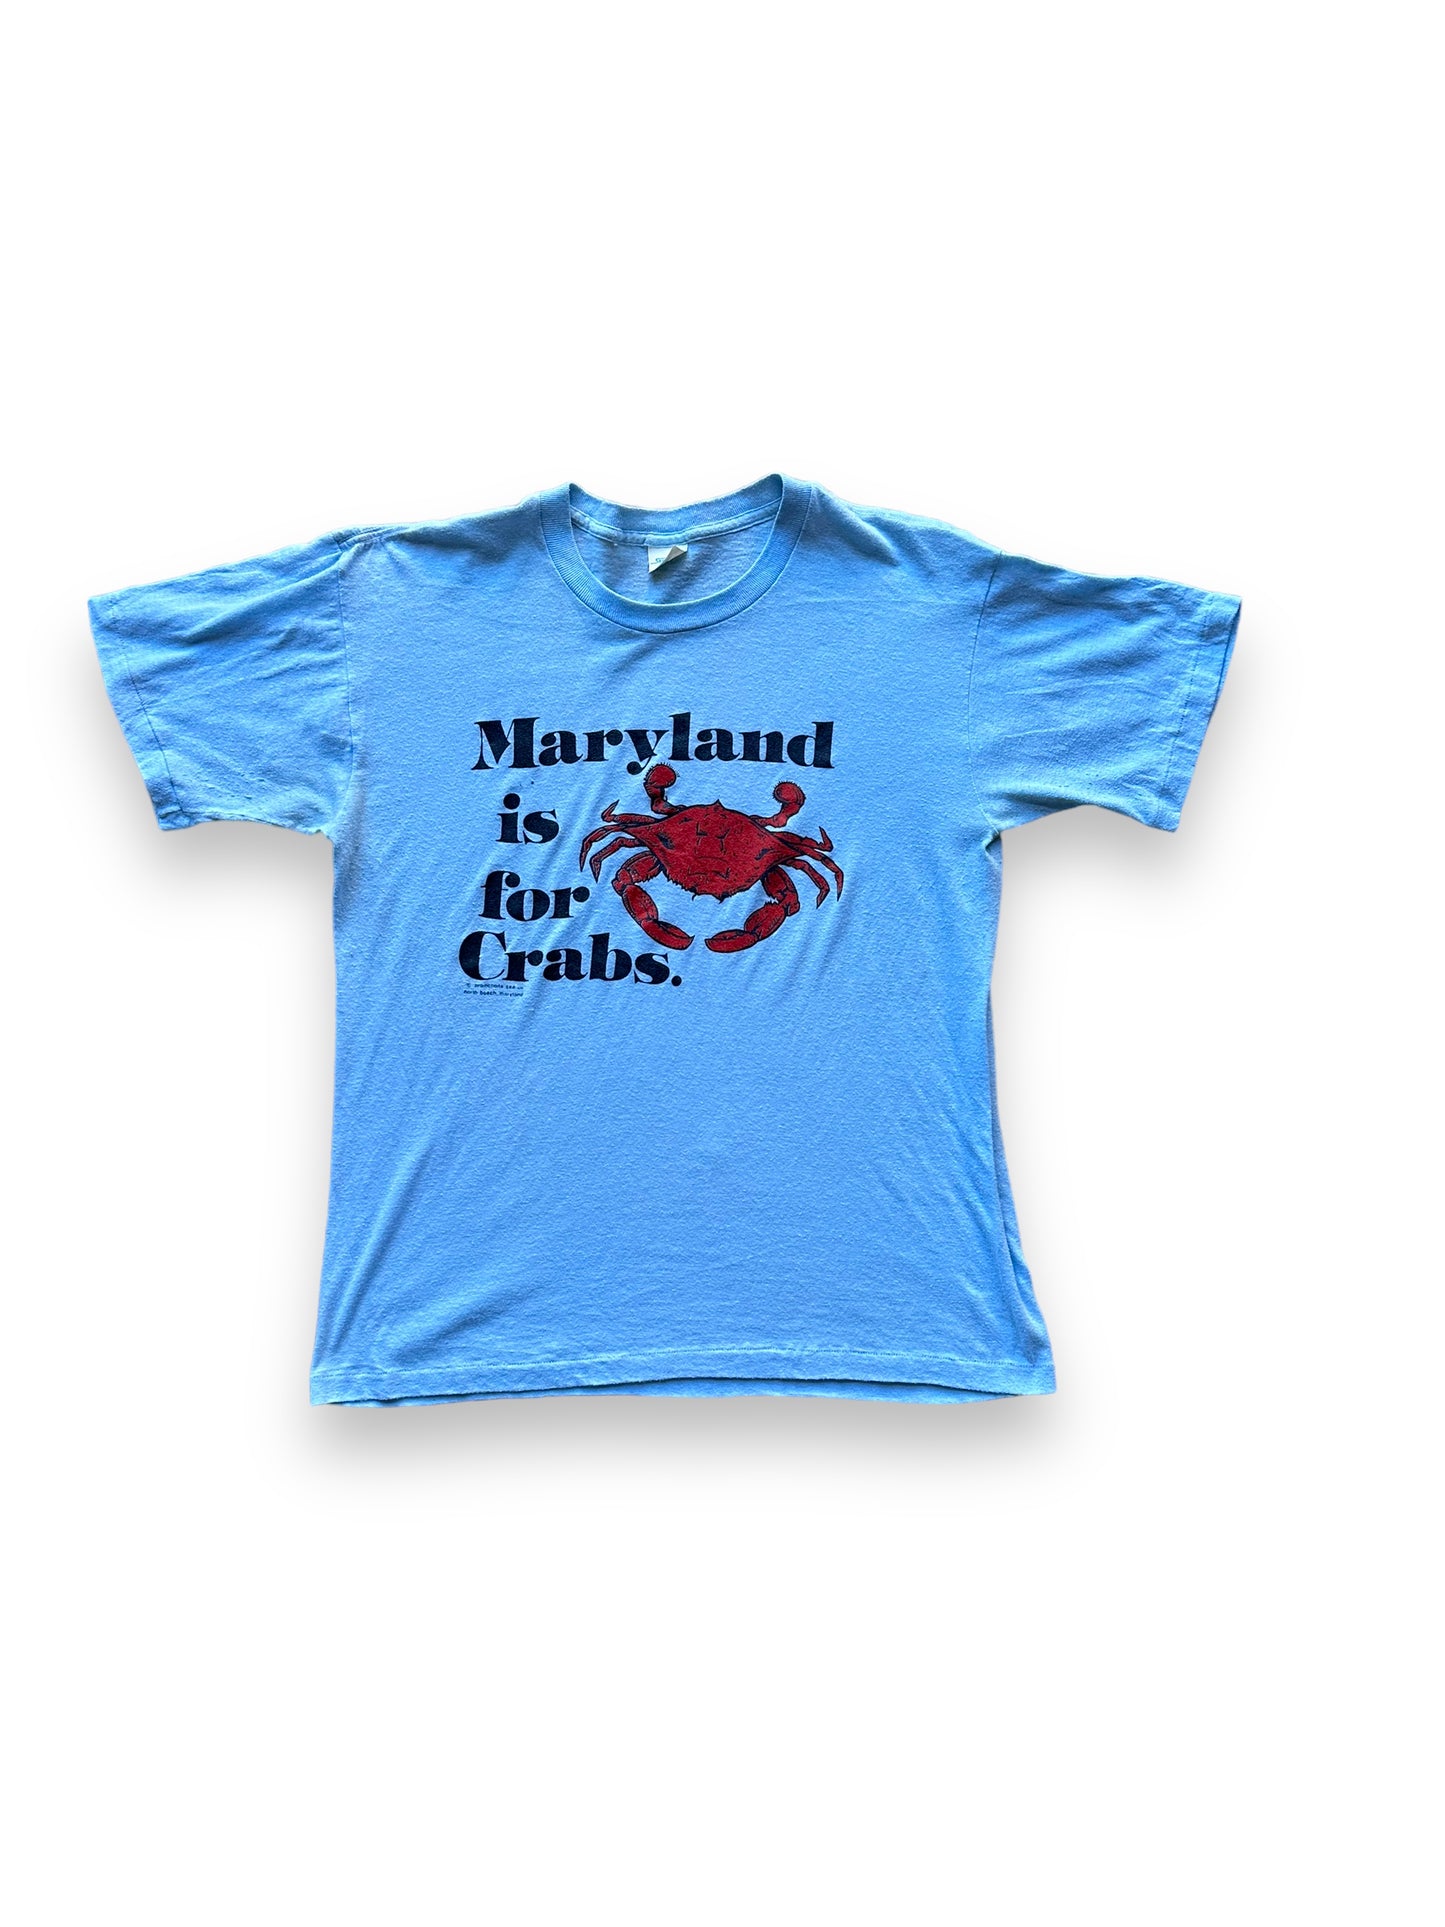 Front of Vintage "Maryland is for Crabs" Tee SZ L |  Vintage Fishing Tee Seattle | Barn Owl Vintage